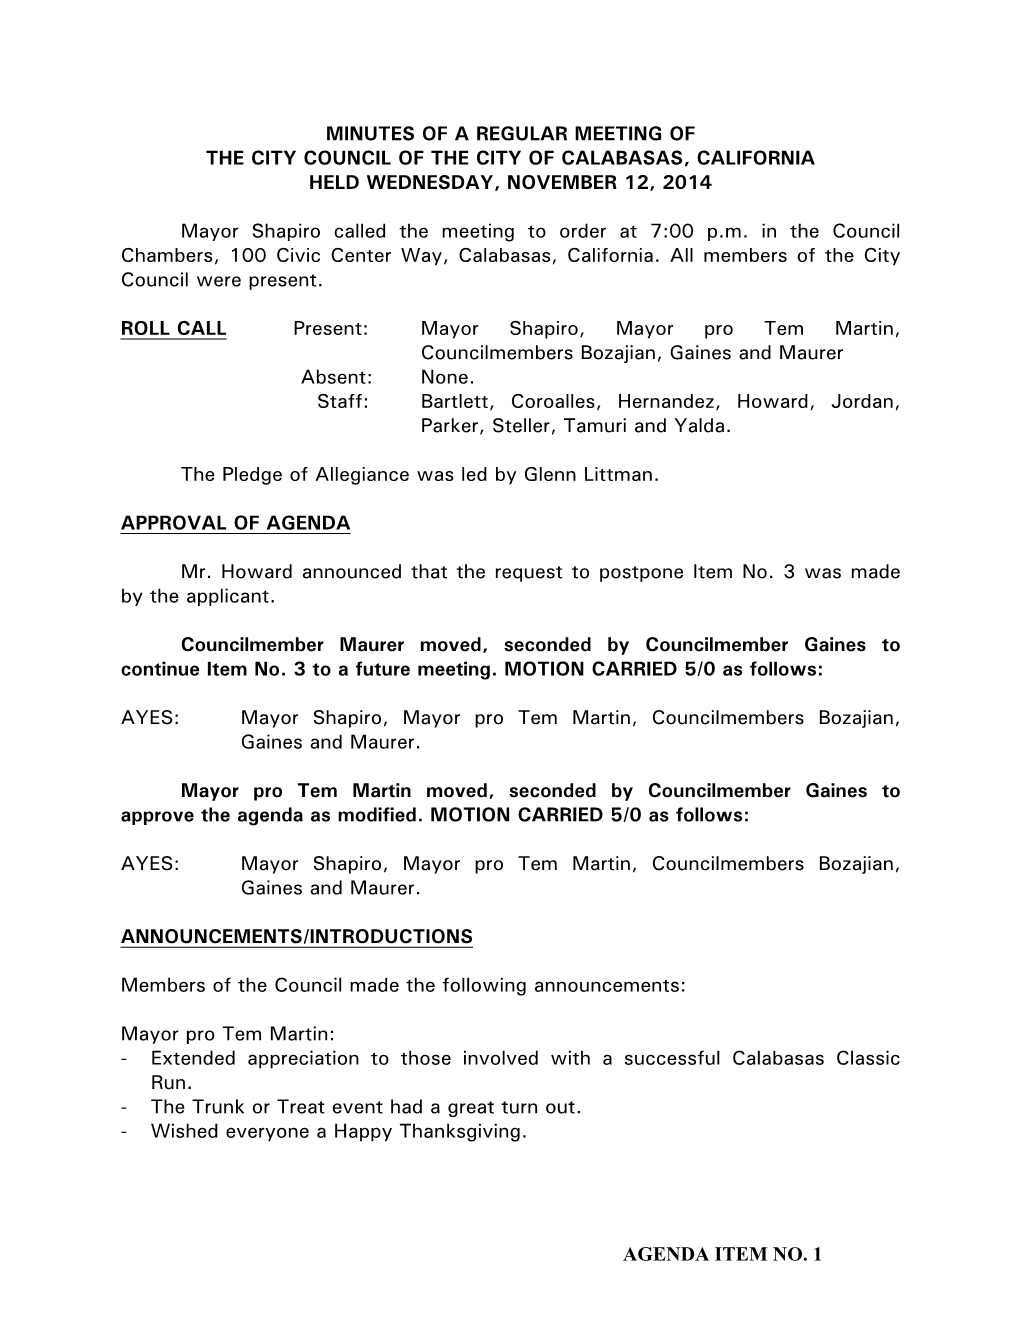 Minutes of a Regular Meeting of the City Council of the City of Calabasas, California Held Wednesday, November 12, 2014